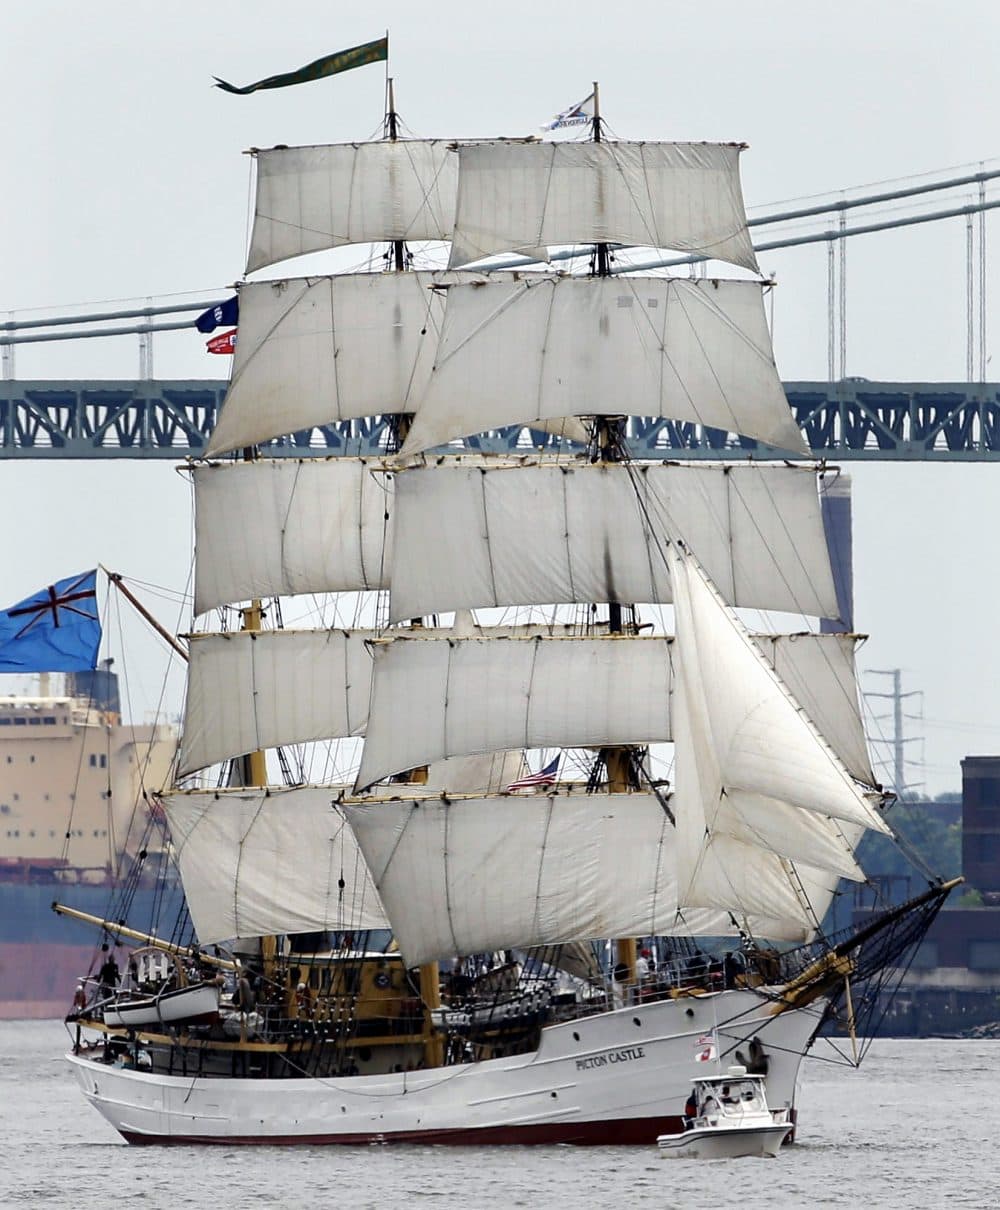 The Picton Castle sails up the Delaware River between Camden, N.J. and Philadelphia during a 2015 tall ships parade. (Matt Slocum/AP)